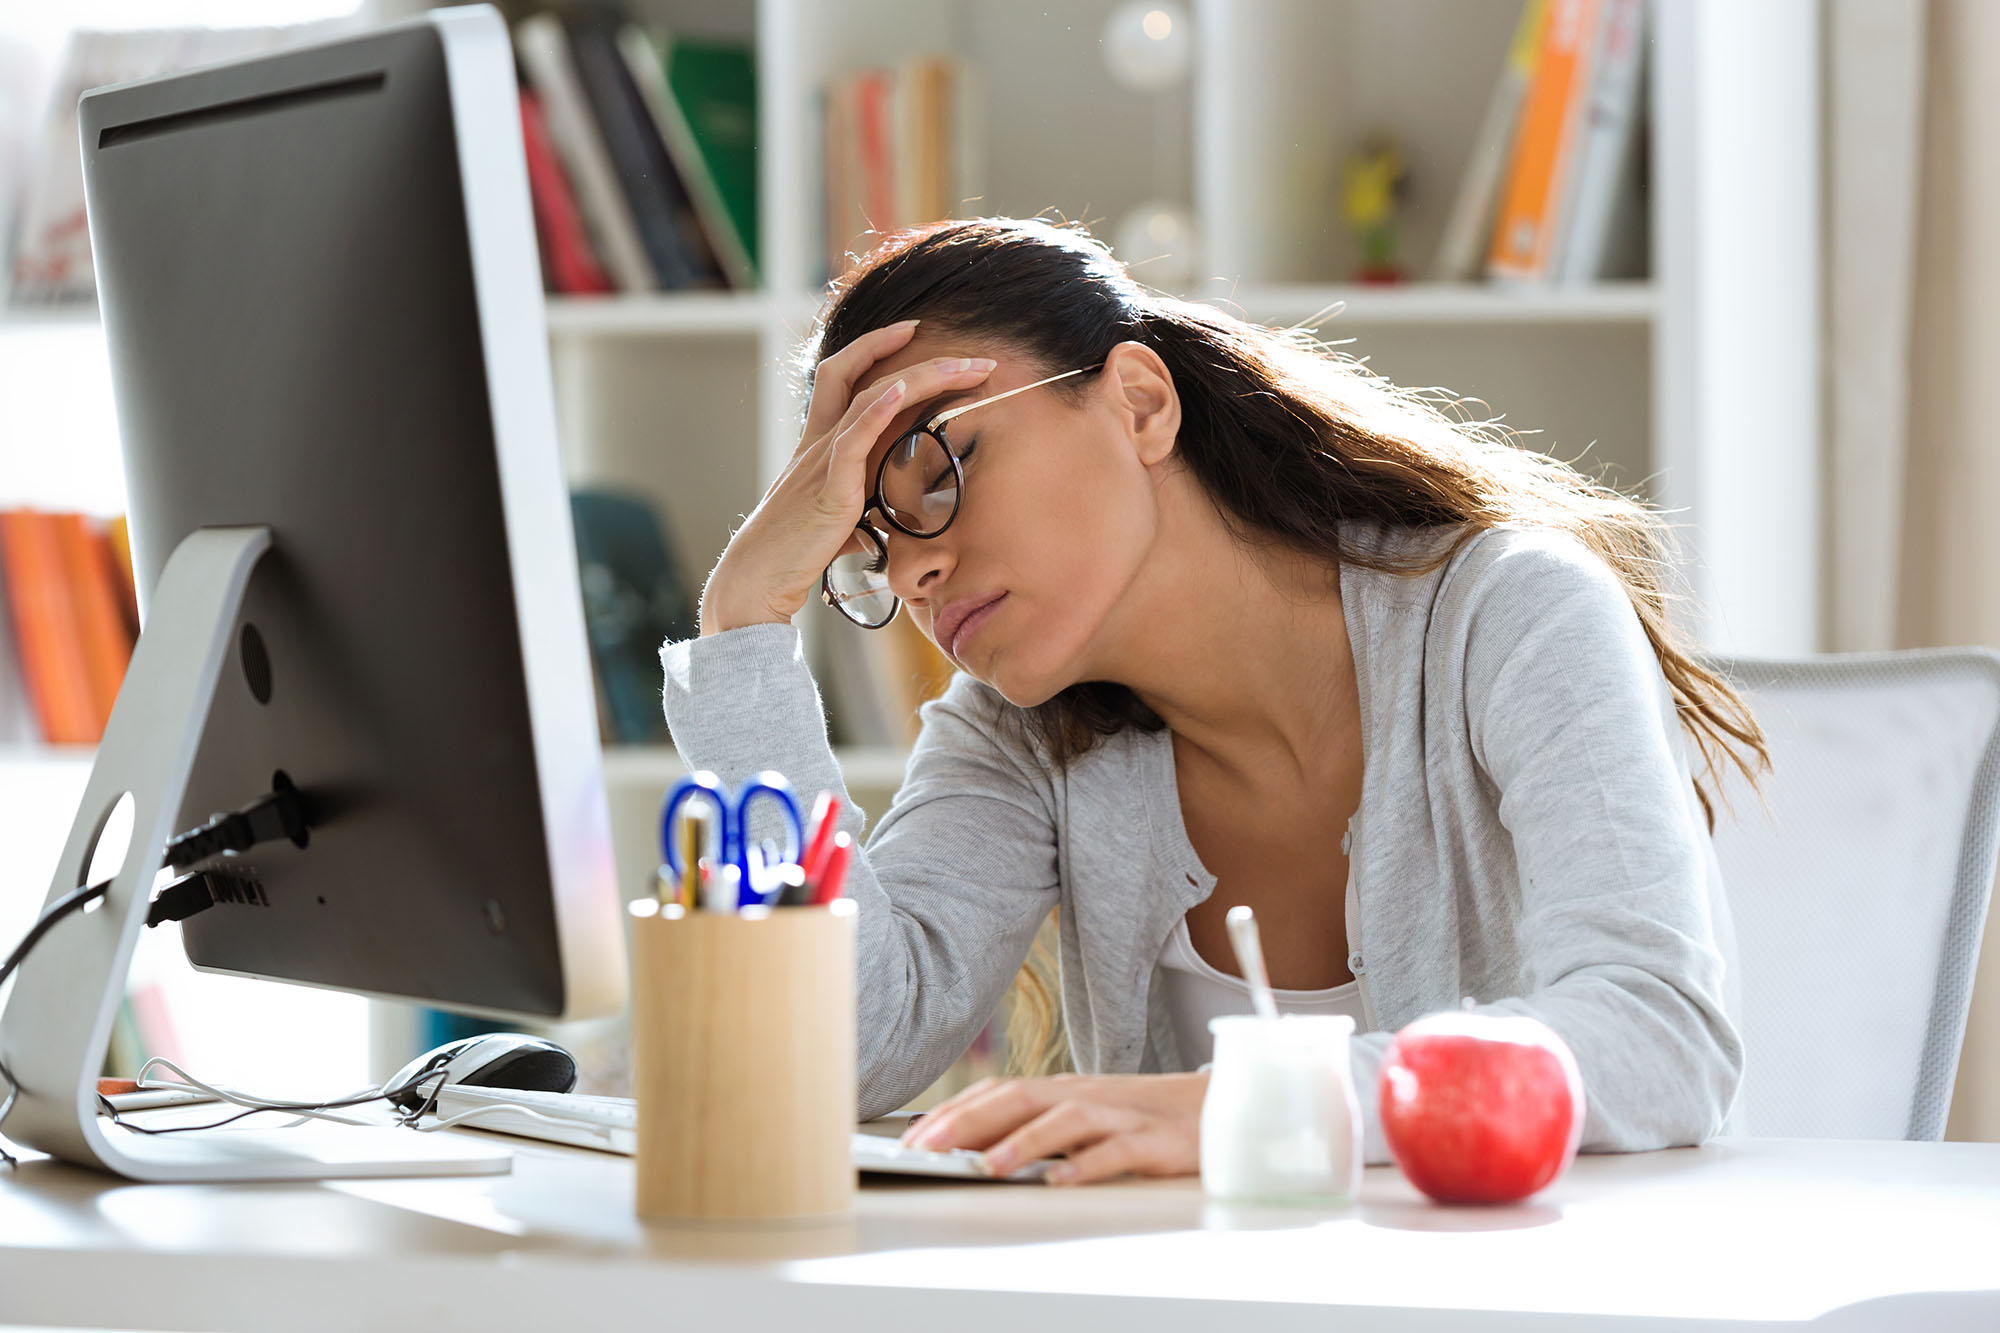 Woman looks fatigued sitting at a desk